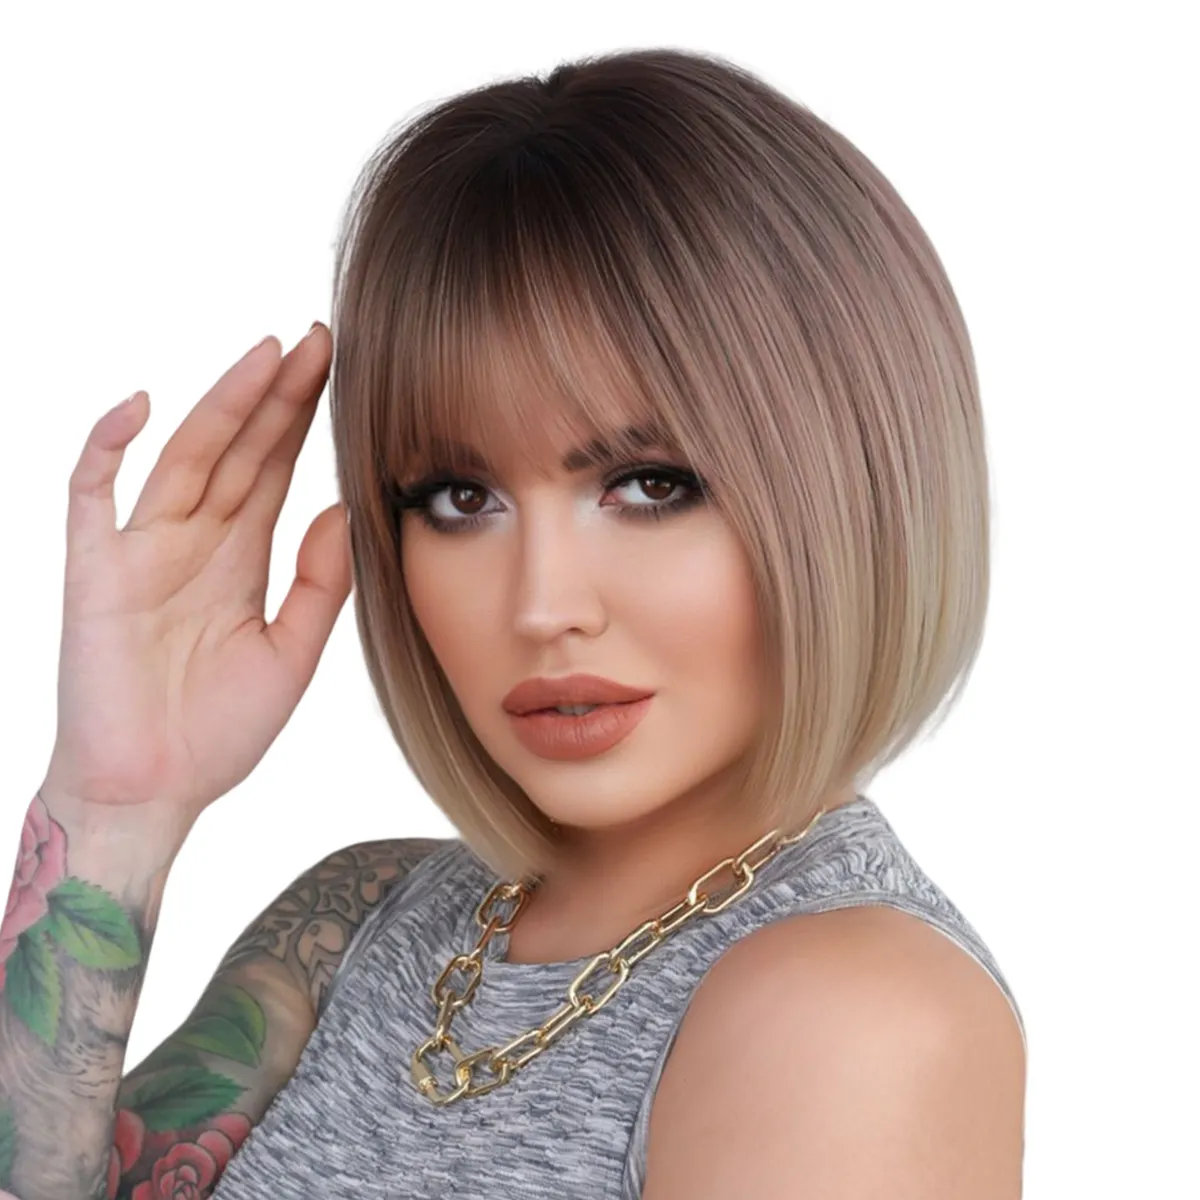 Ombre Blonde Bob Wigs With Bangs Synthetic Straight Bob Wigs For Women Natural Pink Blonde Short Hair Wig For Cosplay Party